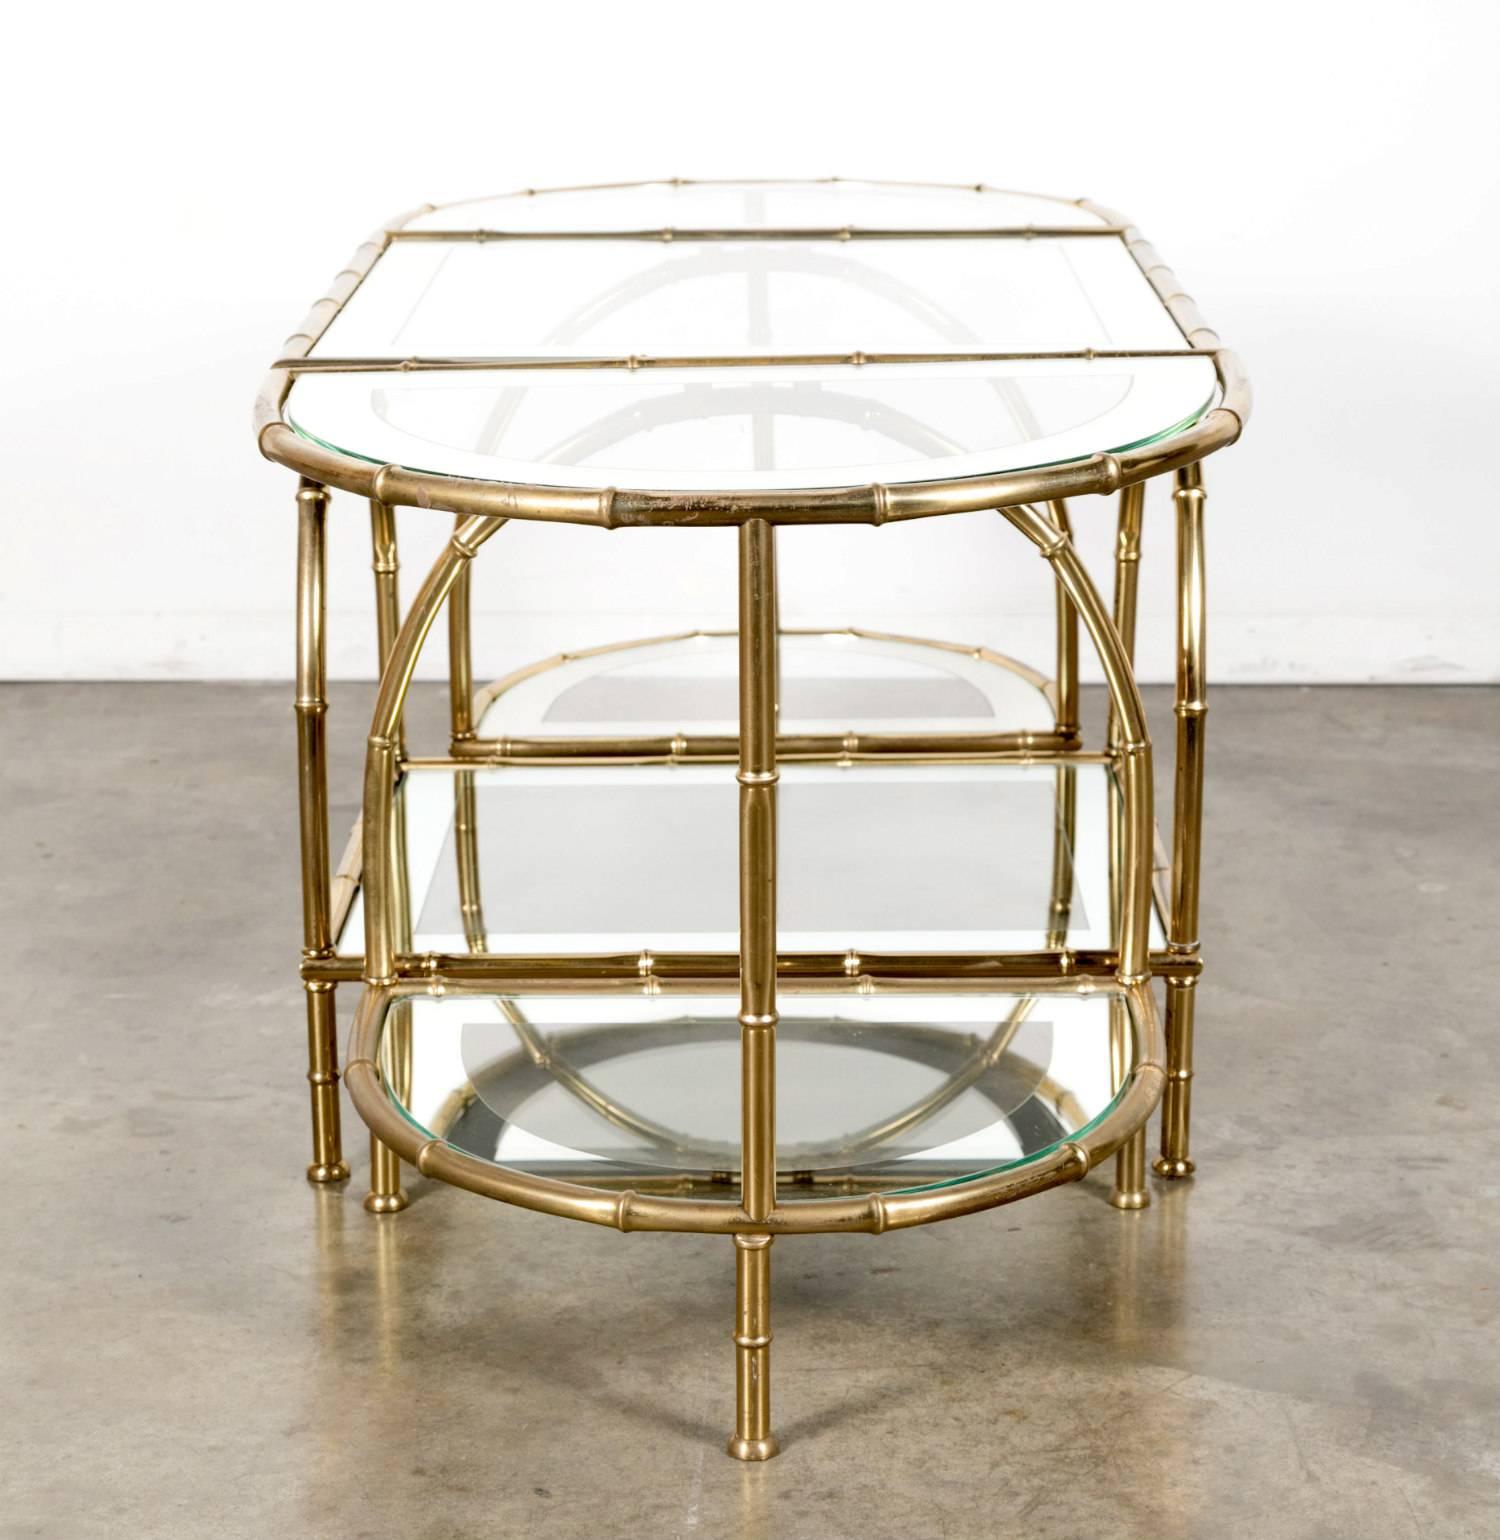 French Midcentury Brass Faux Bamboo Three-Piece Coffee Table by Maison Baguès 1